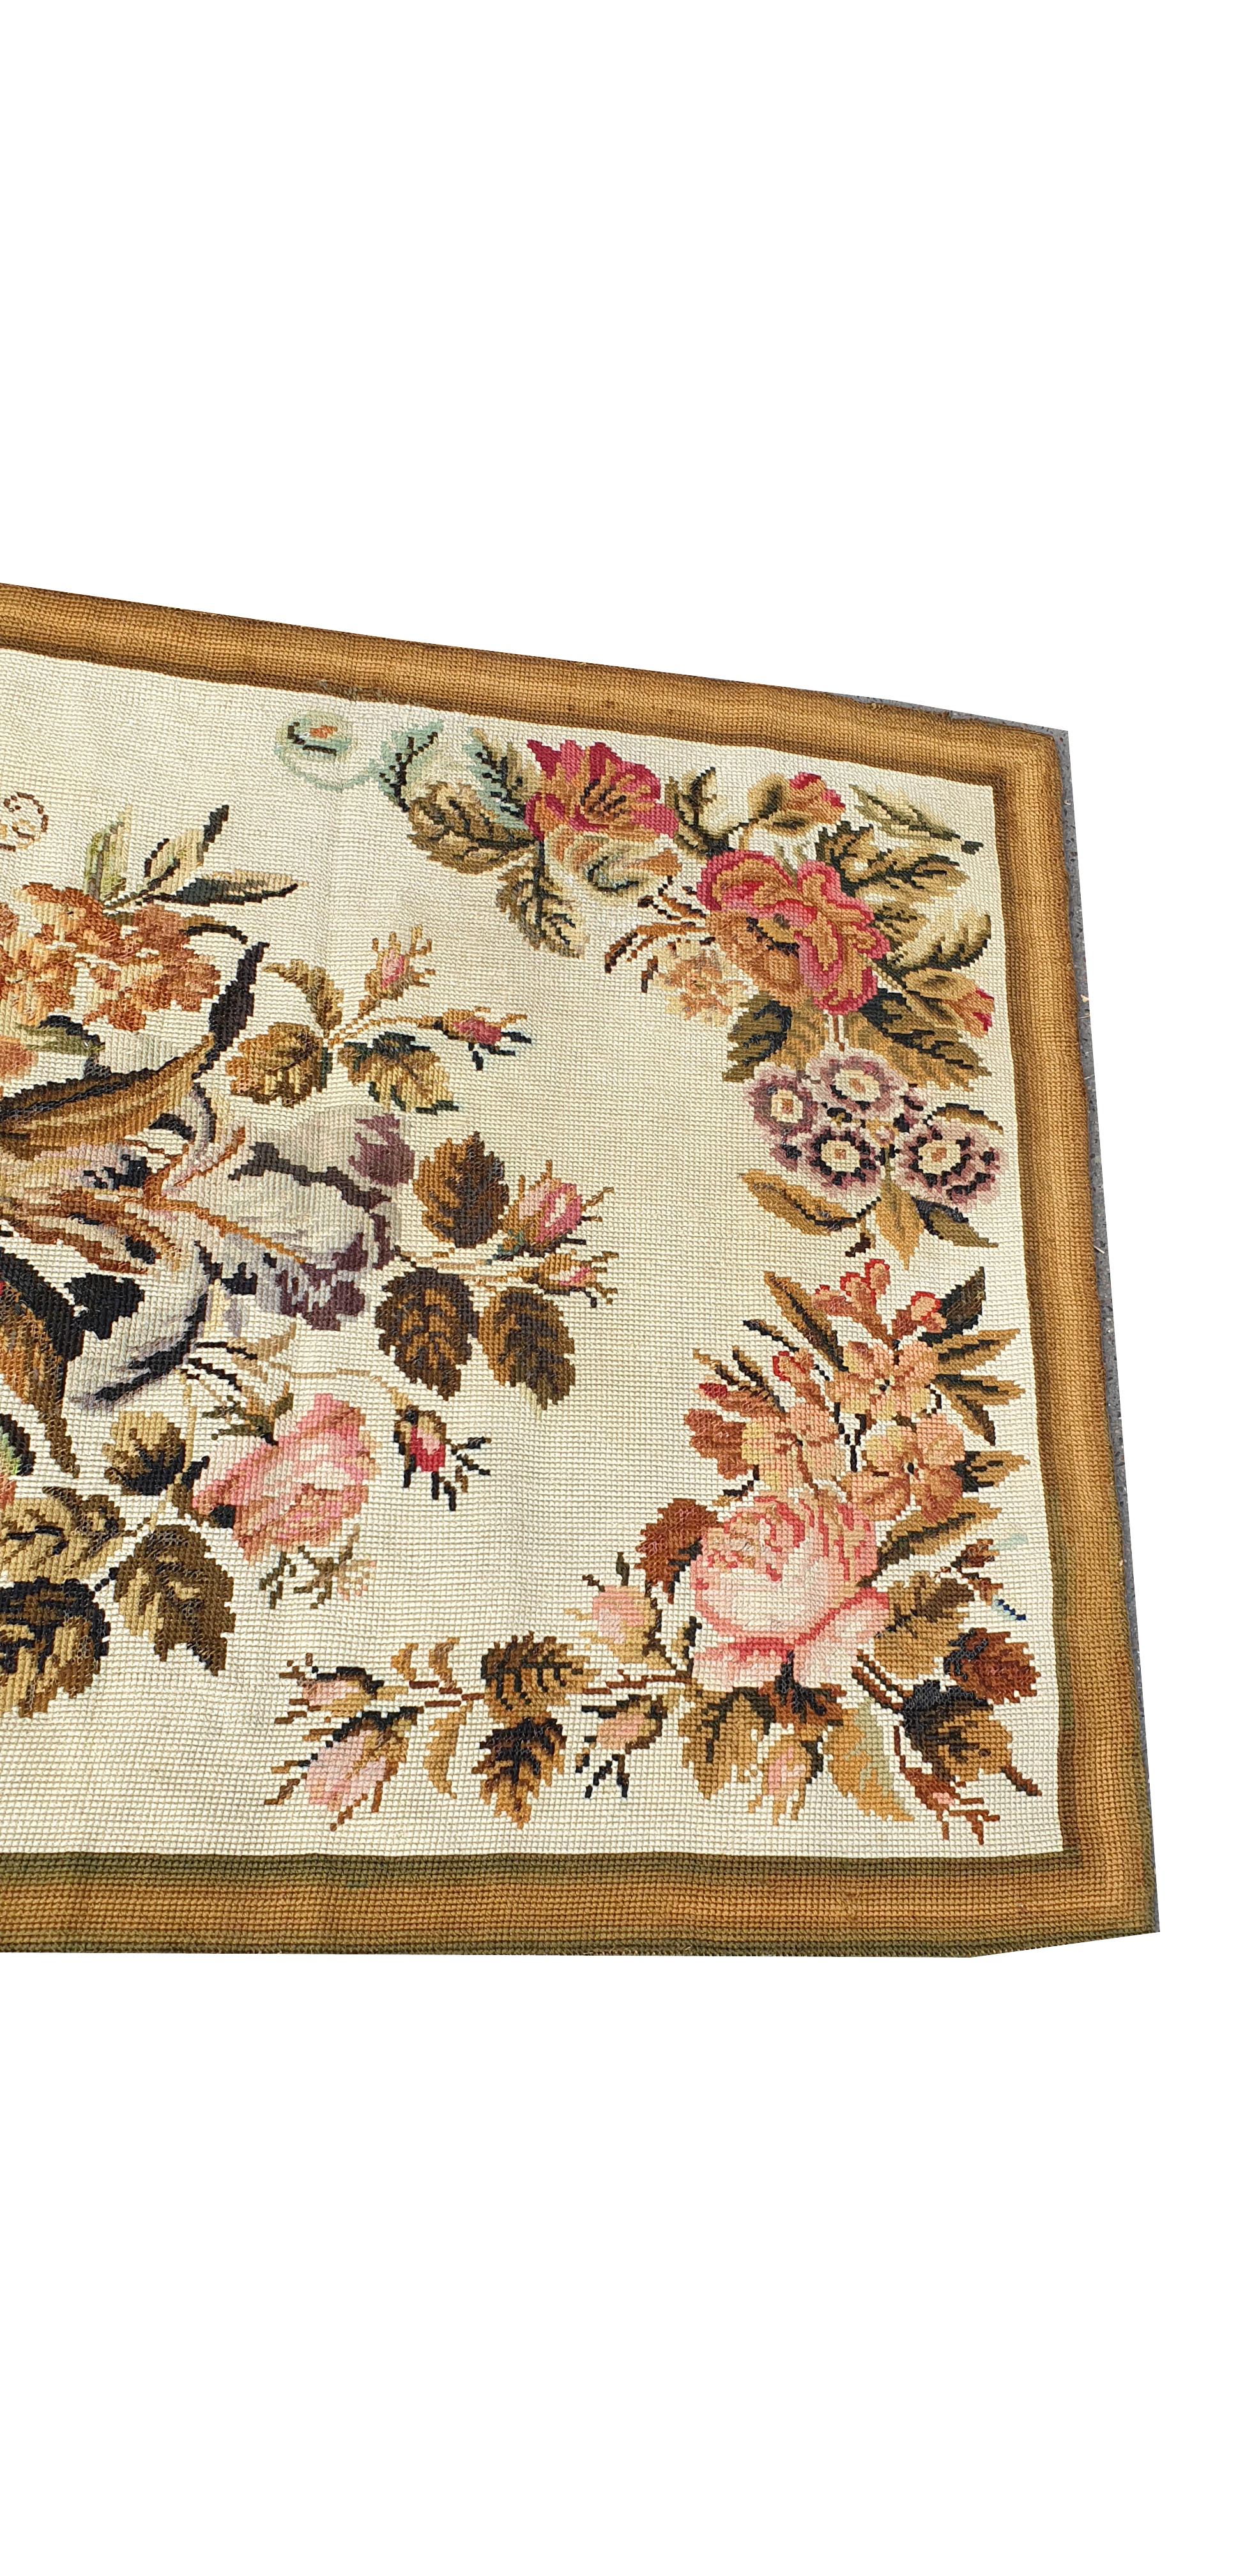 Hand-Crafted 19th Century Au Petit Point Rug - N° 883 For Sale